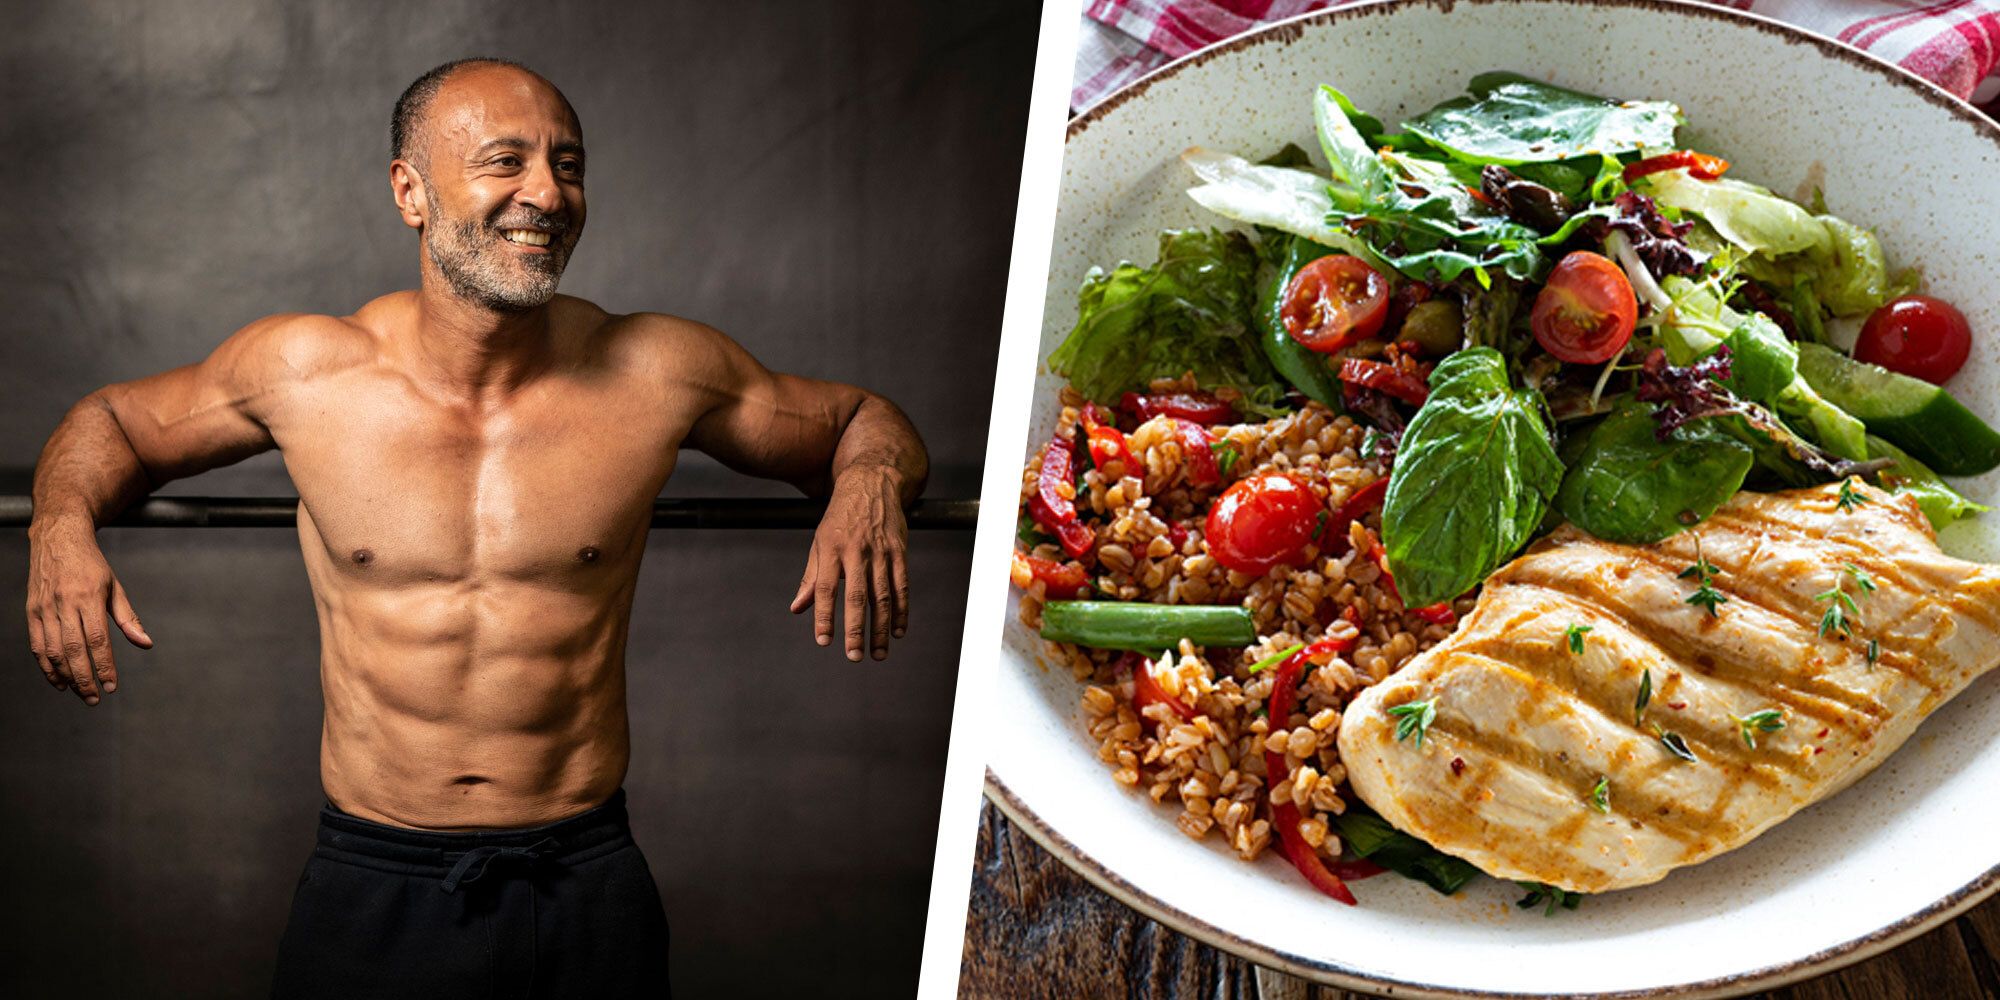 5 Nutrition And Diet Tips To Transform Your Abs In 90 Days